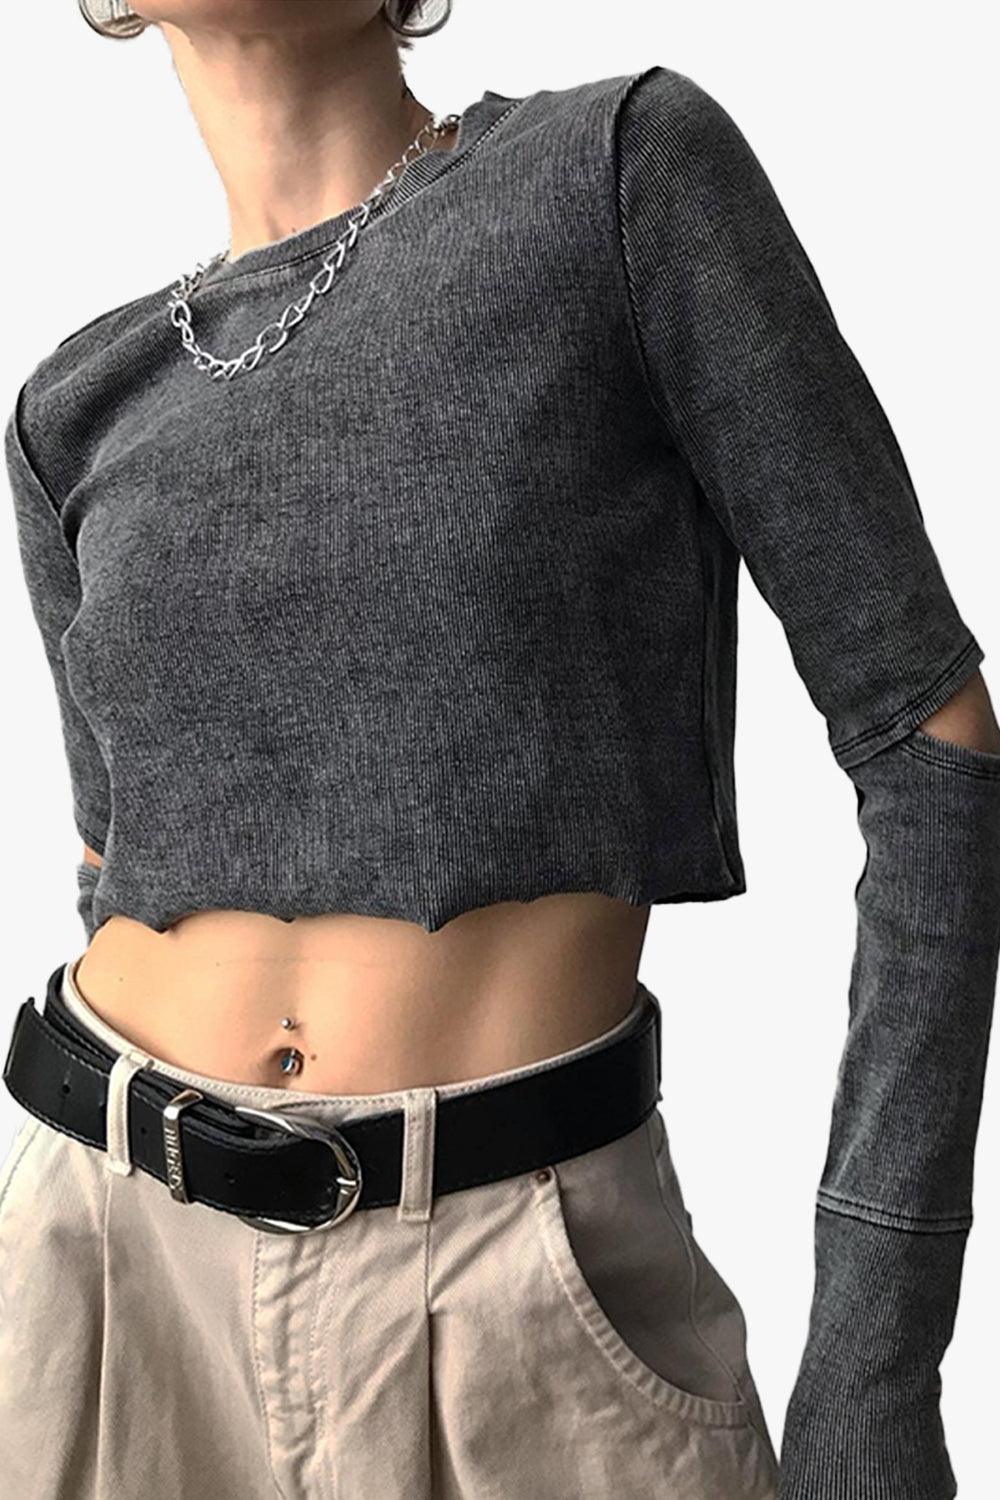 Grunge Aesthetic Crop Top - Aesthetic Clothes Shop